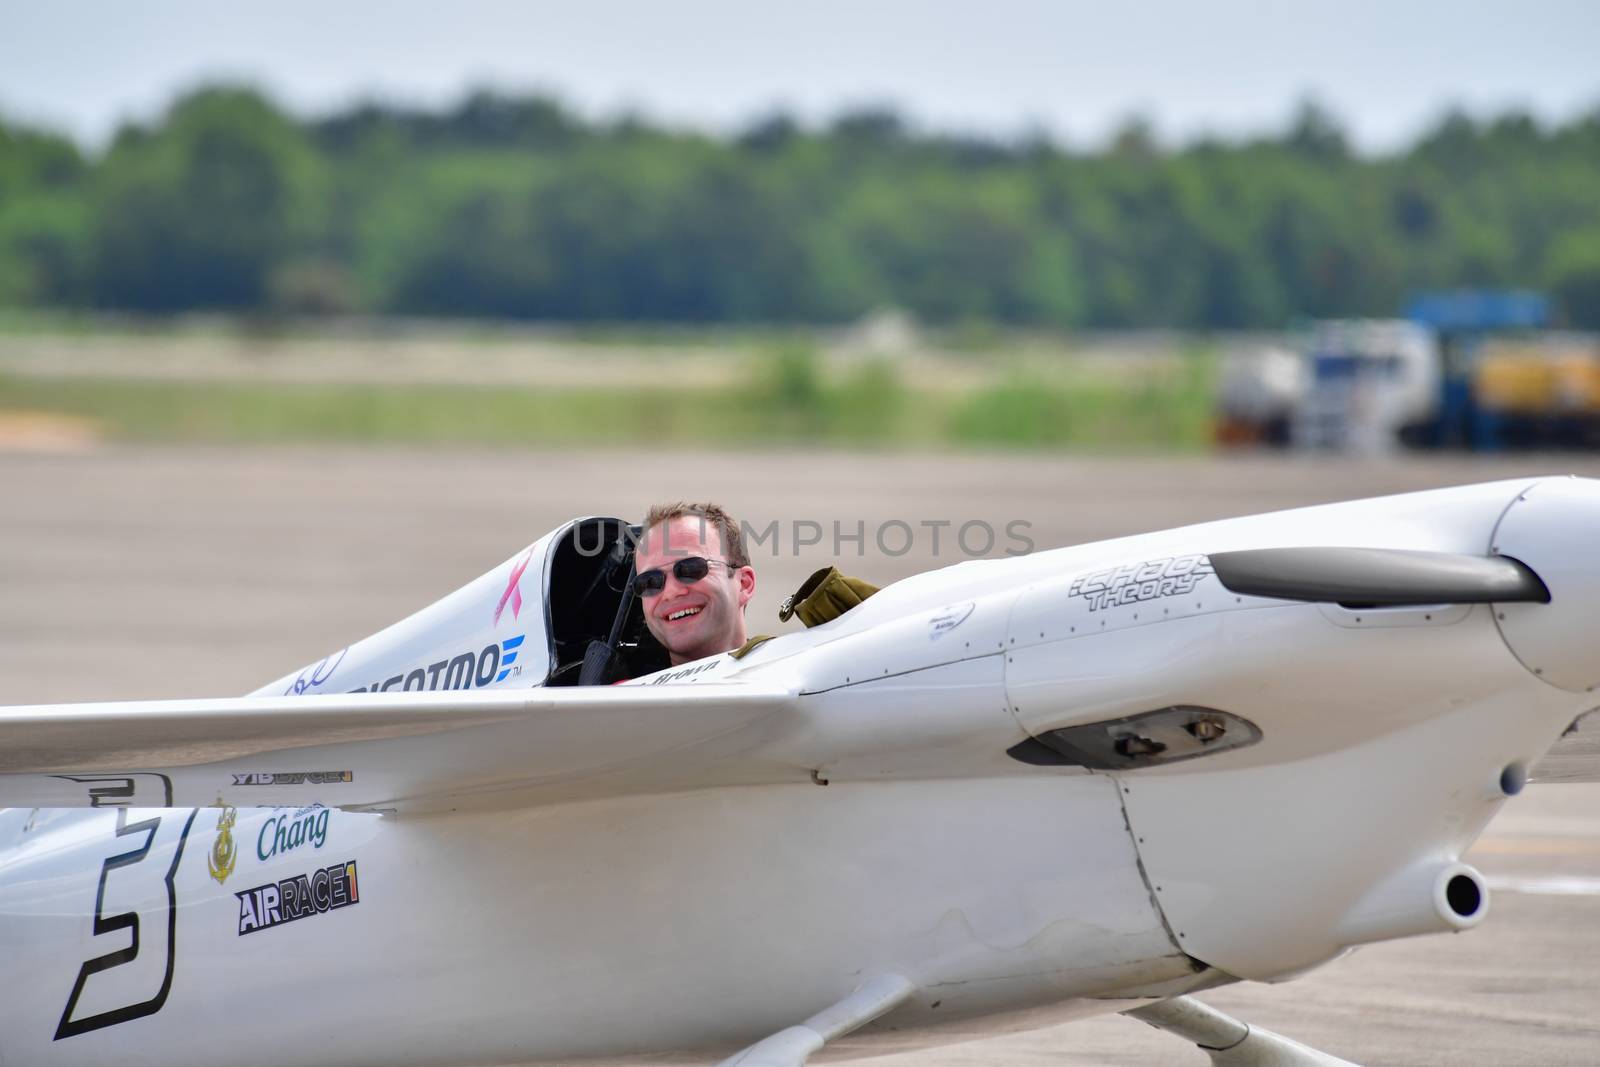 CHONBURI - NOVEMBER 20 : Stanislas Damiron pilot of France with Western Air Racing aircraft in Air Race 1 Thailand at U-Tapao International Airport on November 20, 2016 in Chonburi, Thailand.